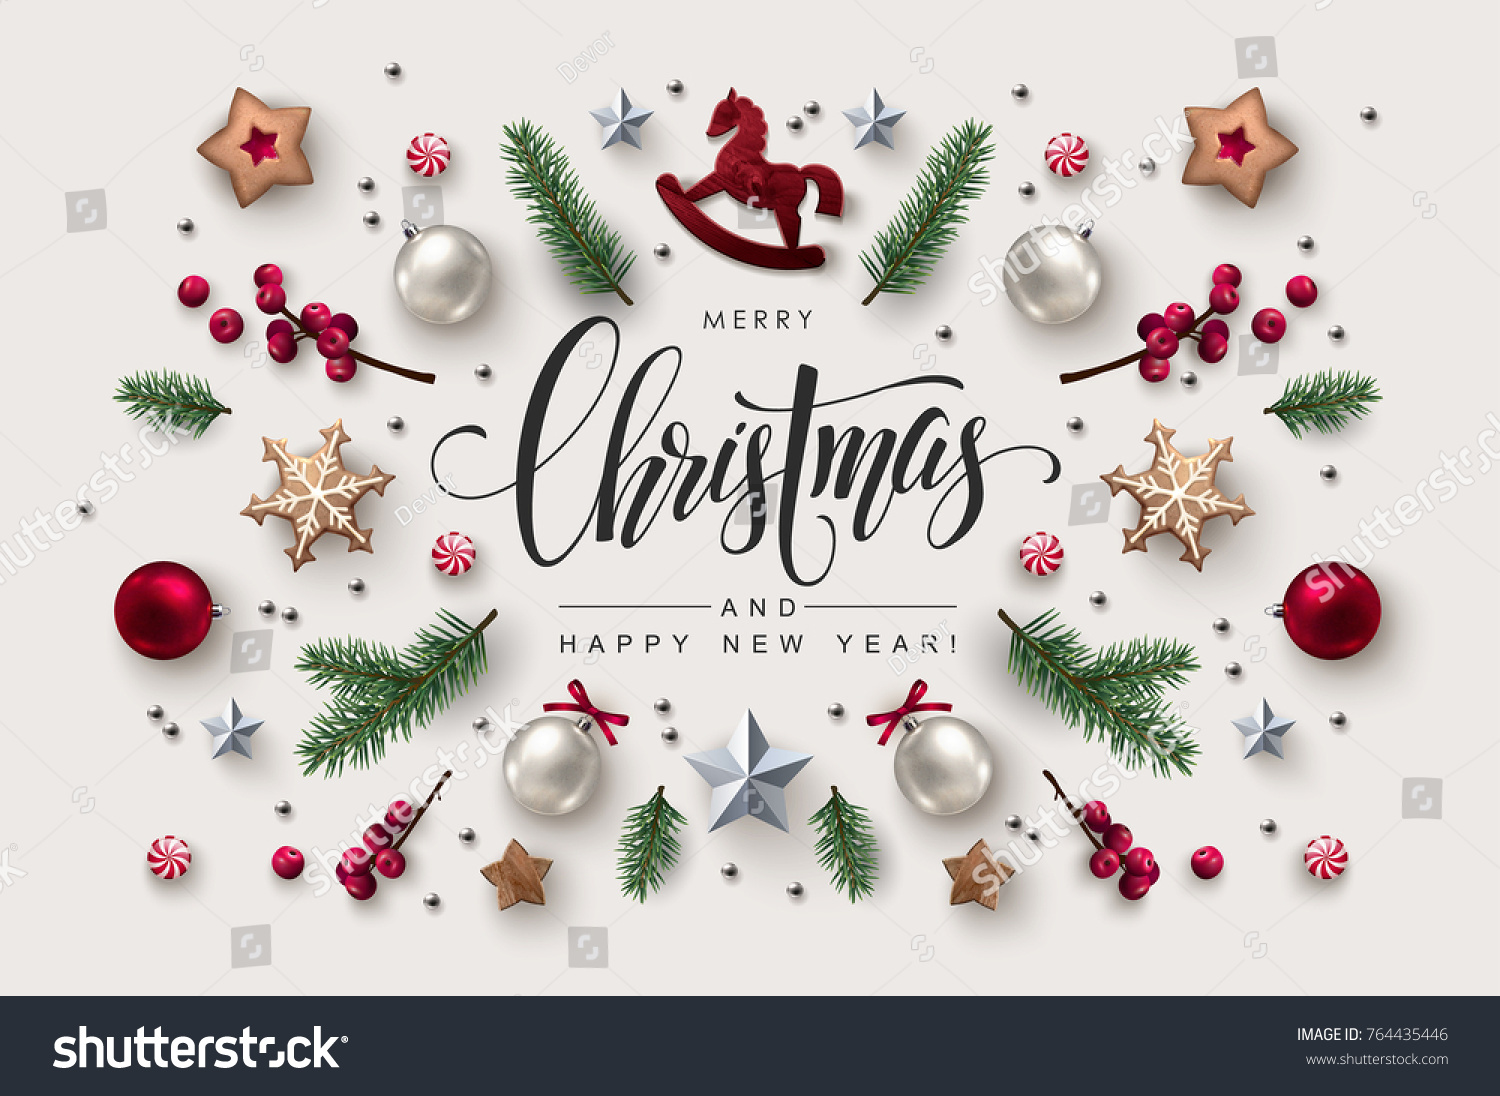 Christmas postcard with Calligraphic Season Wishes and Composition of Festive Elements such as Cookies, Candies, Berries, Christmas Tree Decorations. #764435446